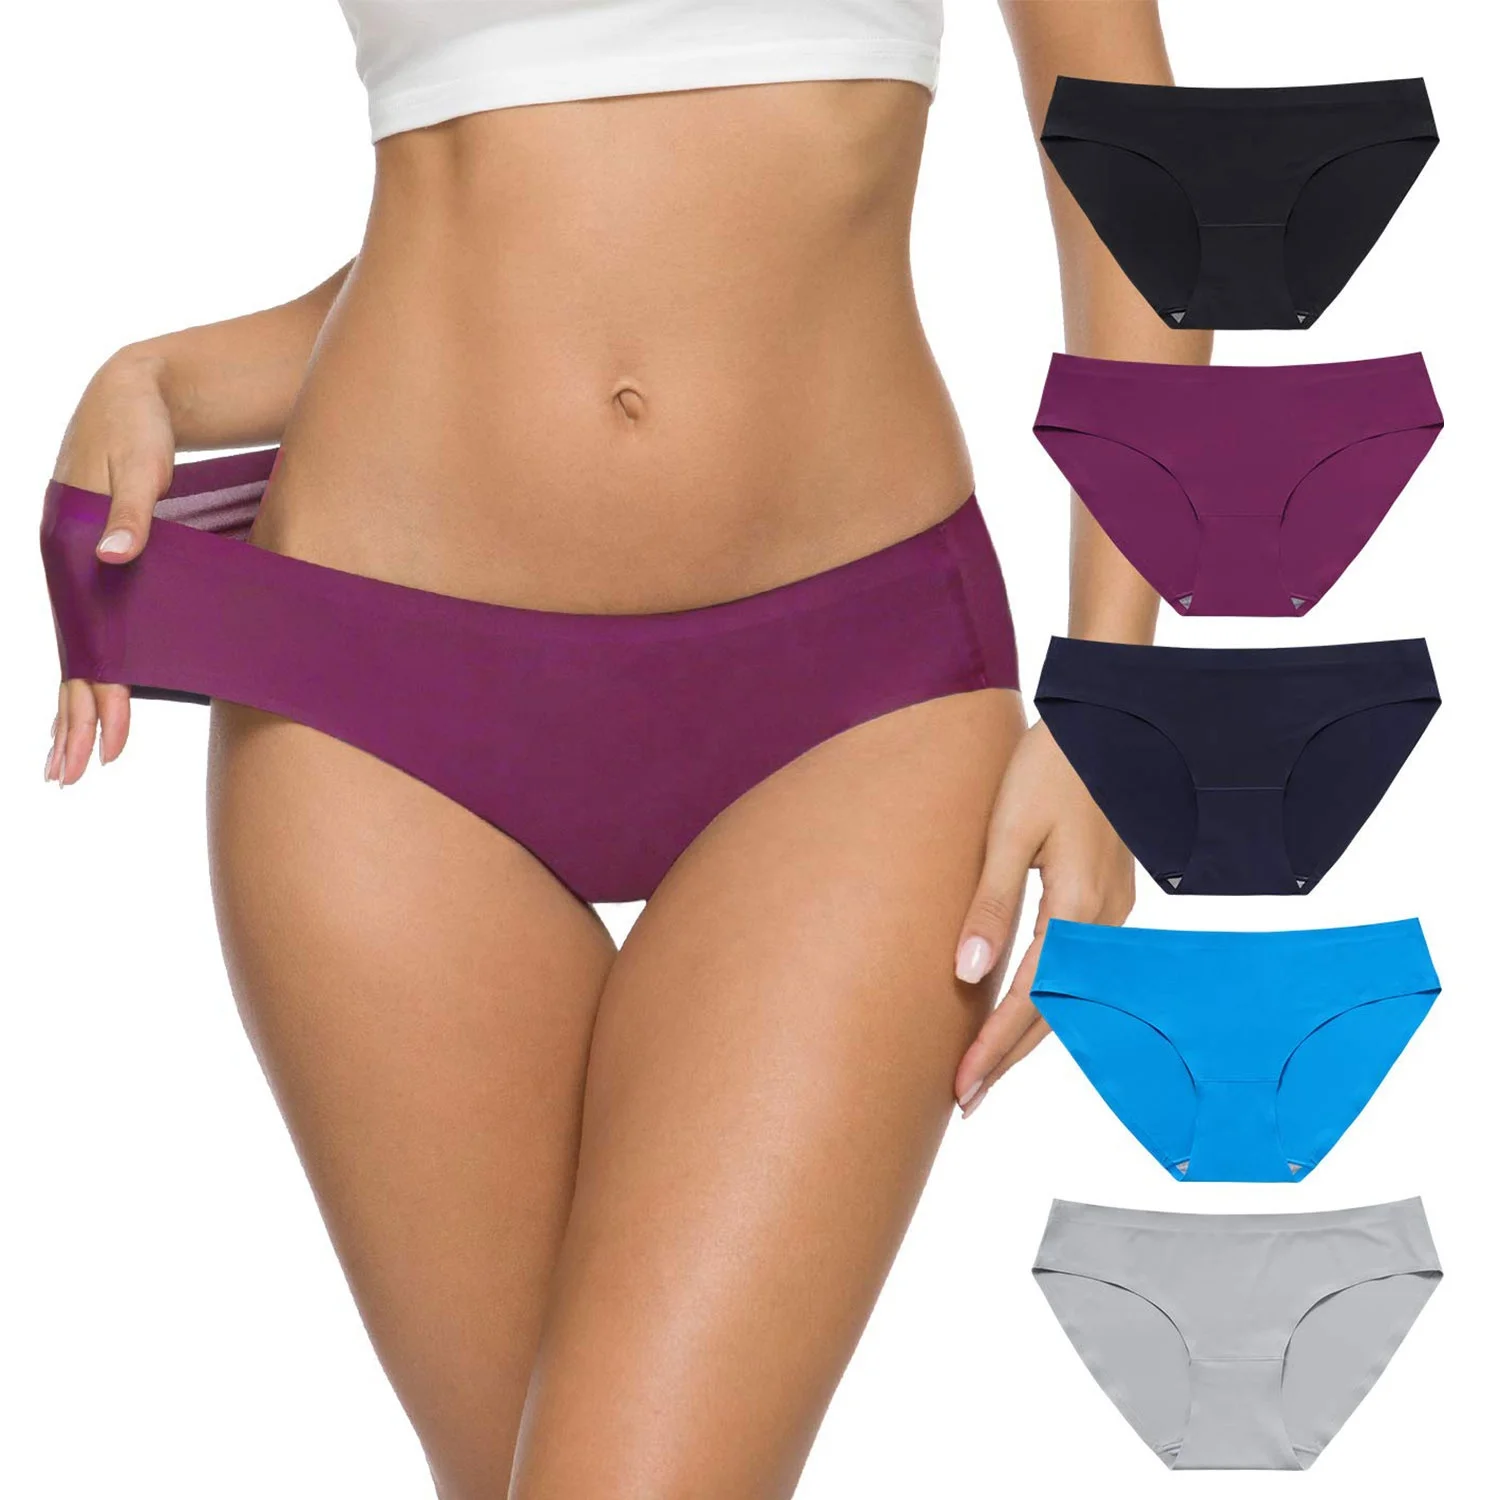 

Plus Size High-end seamless smooth solid women daily briefs Ladies lingerie Girls Shorty Women's Panties, Picture shows